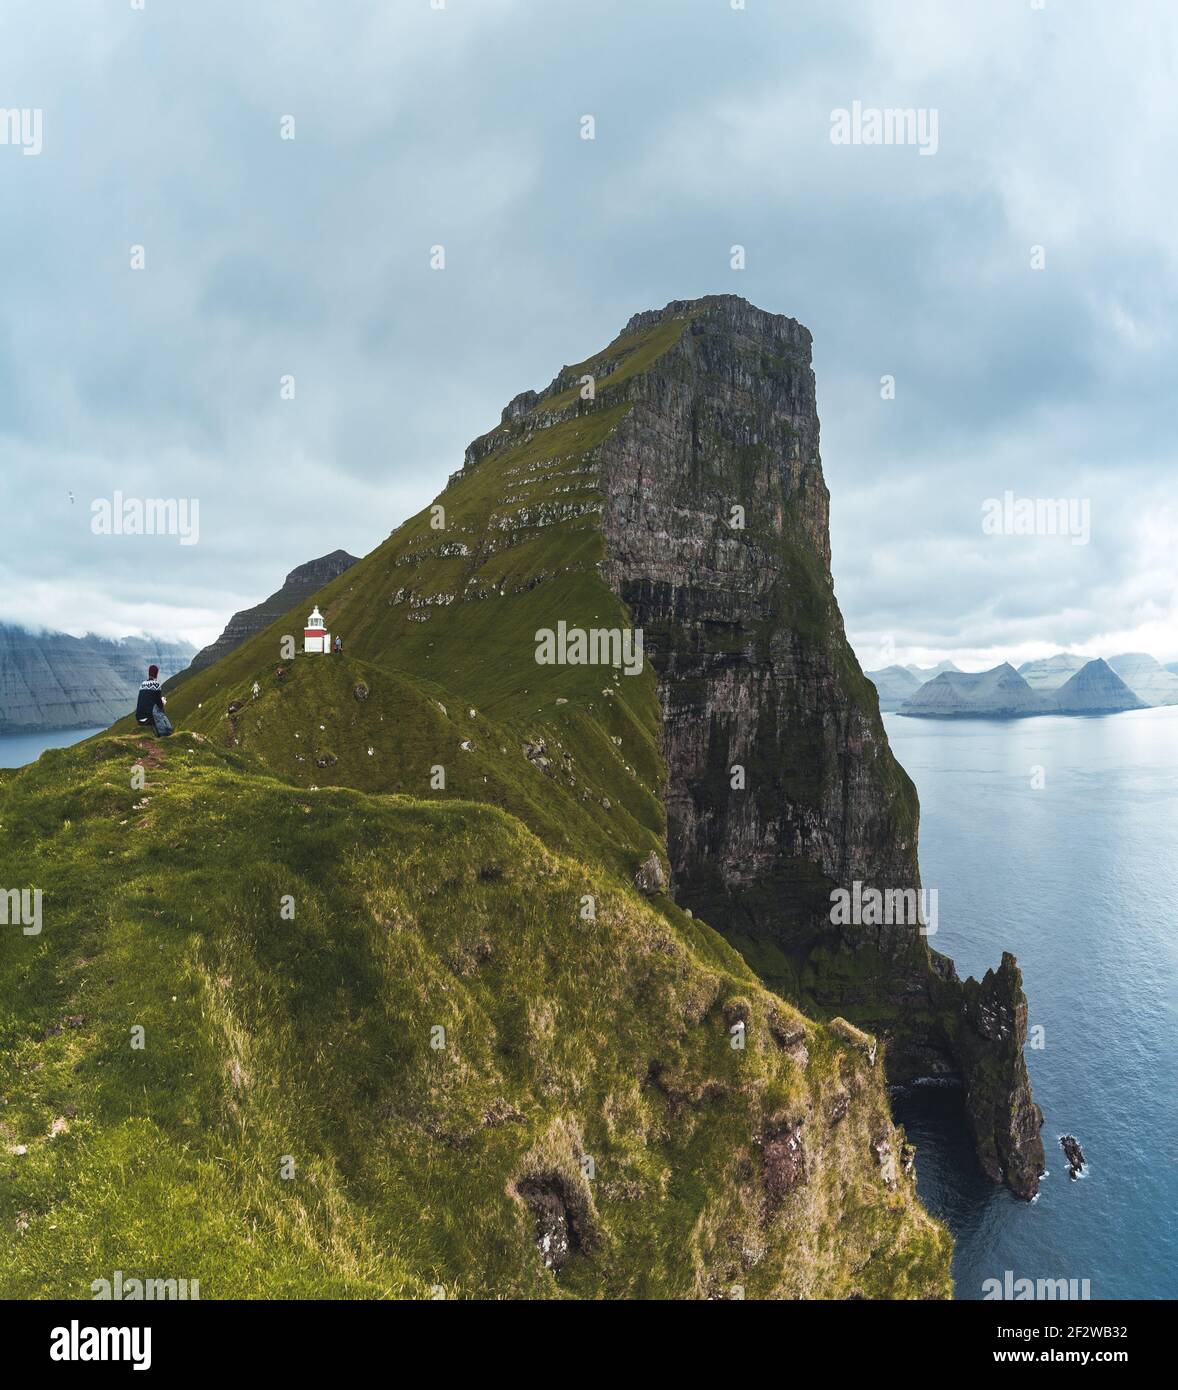 Kalsoy Island with Kallur lighthouse on on Faroe islands, Denmark, Europe. Clouds over high cliffs, turquoise Atlantic ocean and spectacular views. Stock Photo